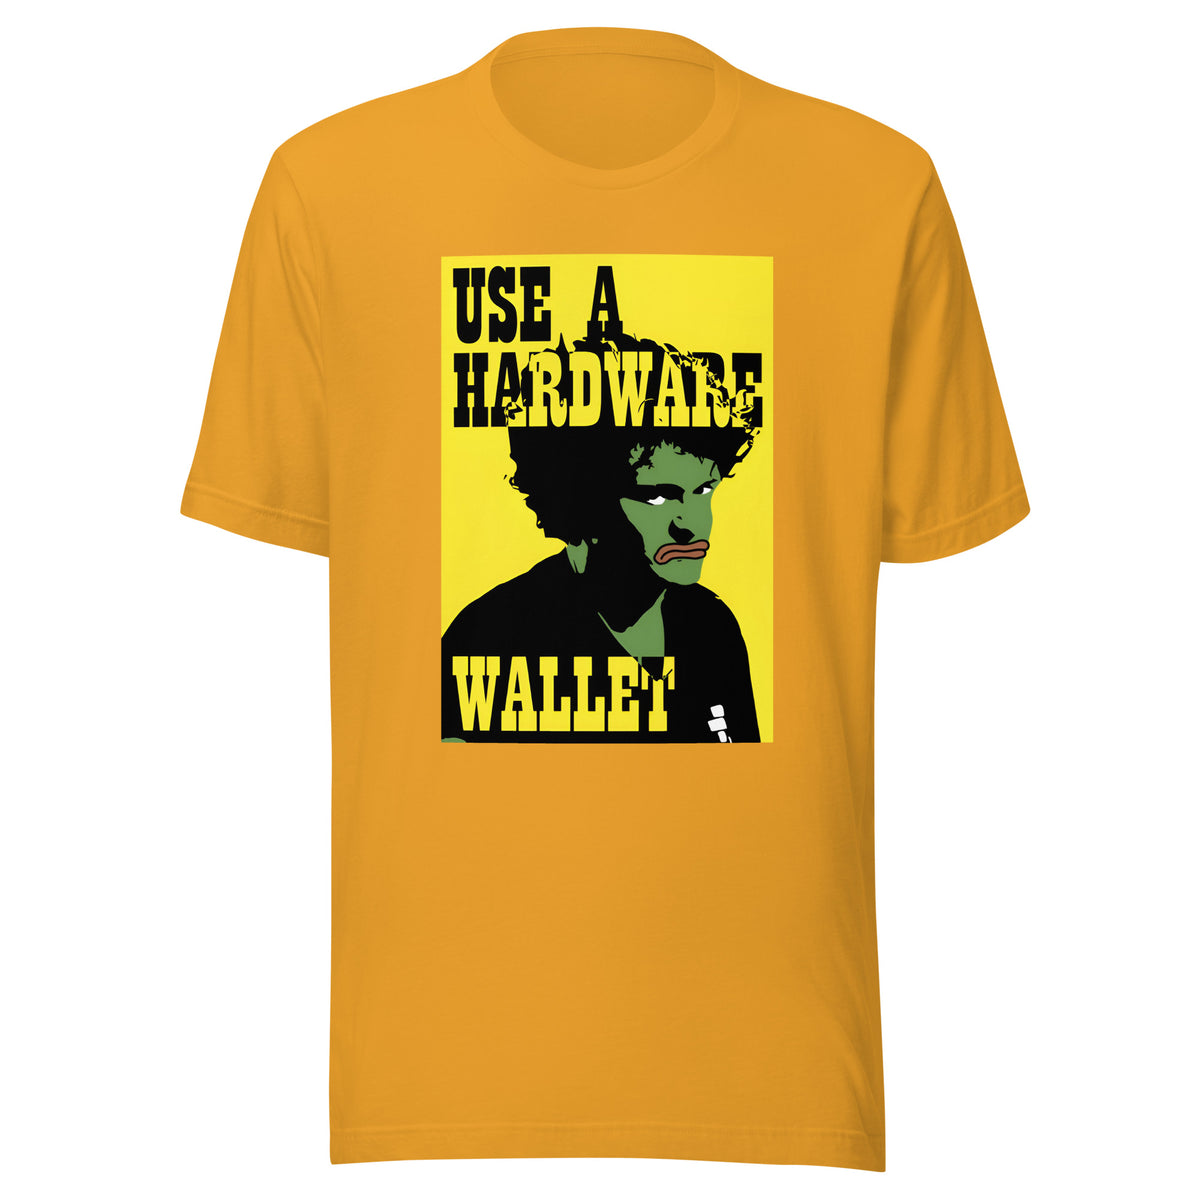 Use a Hardware Wallet by 6529er and 6529 | Unisex T-shirt